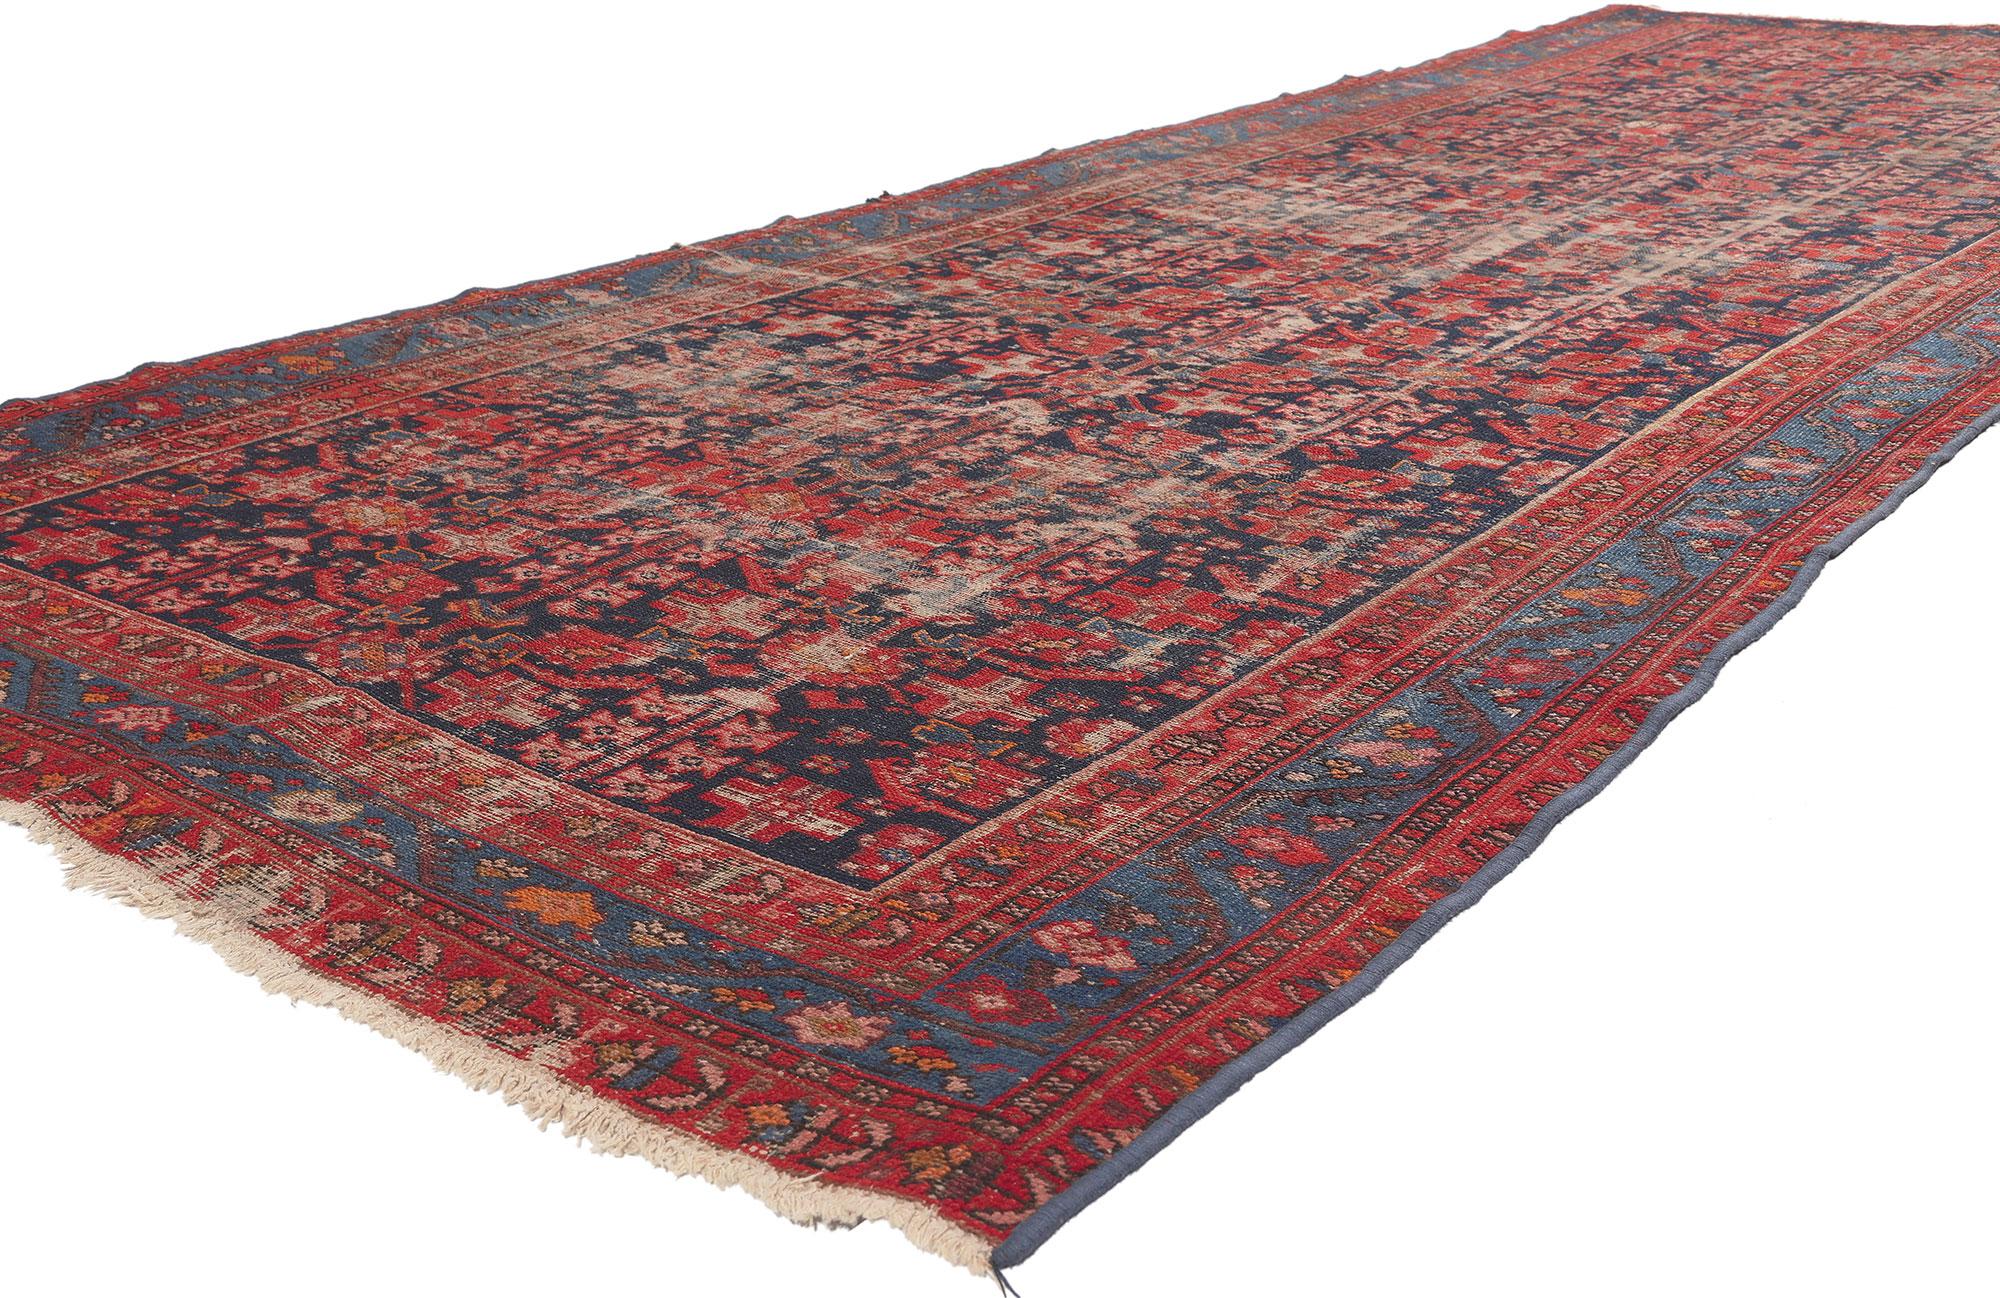 76731 Antique-Worn Persian Malayer Rug, 04'08 x 12'10.
Rustic luxe meets welcomed informality in this antique-worn Persian Malayer rug. Considerably weathered and well-loved, this antique Malayer rug exhibits authentic character and timeless charm.